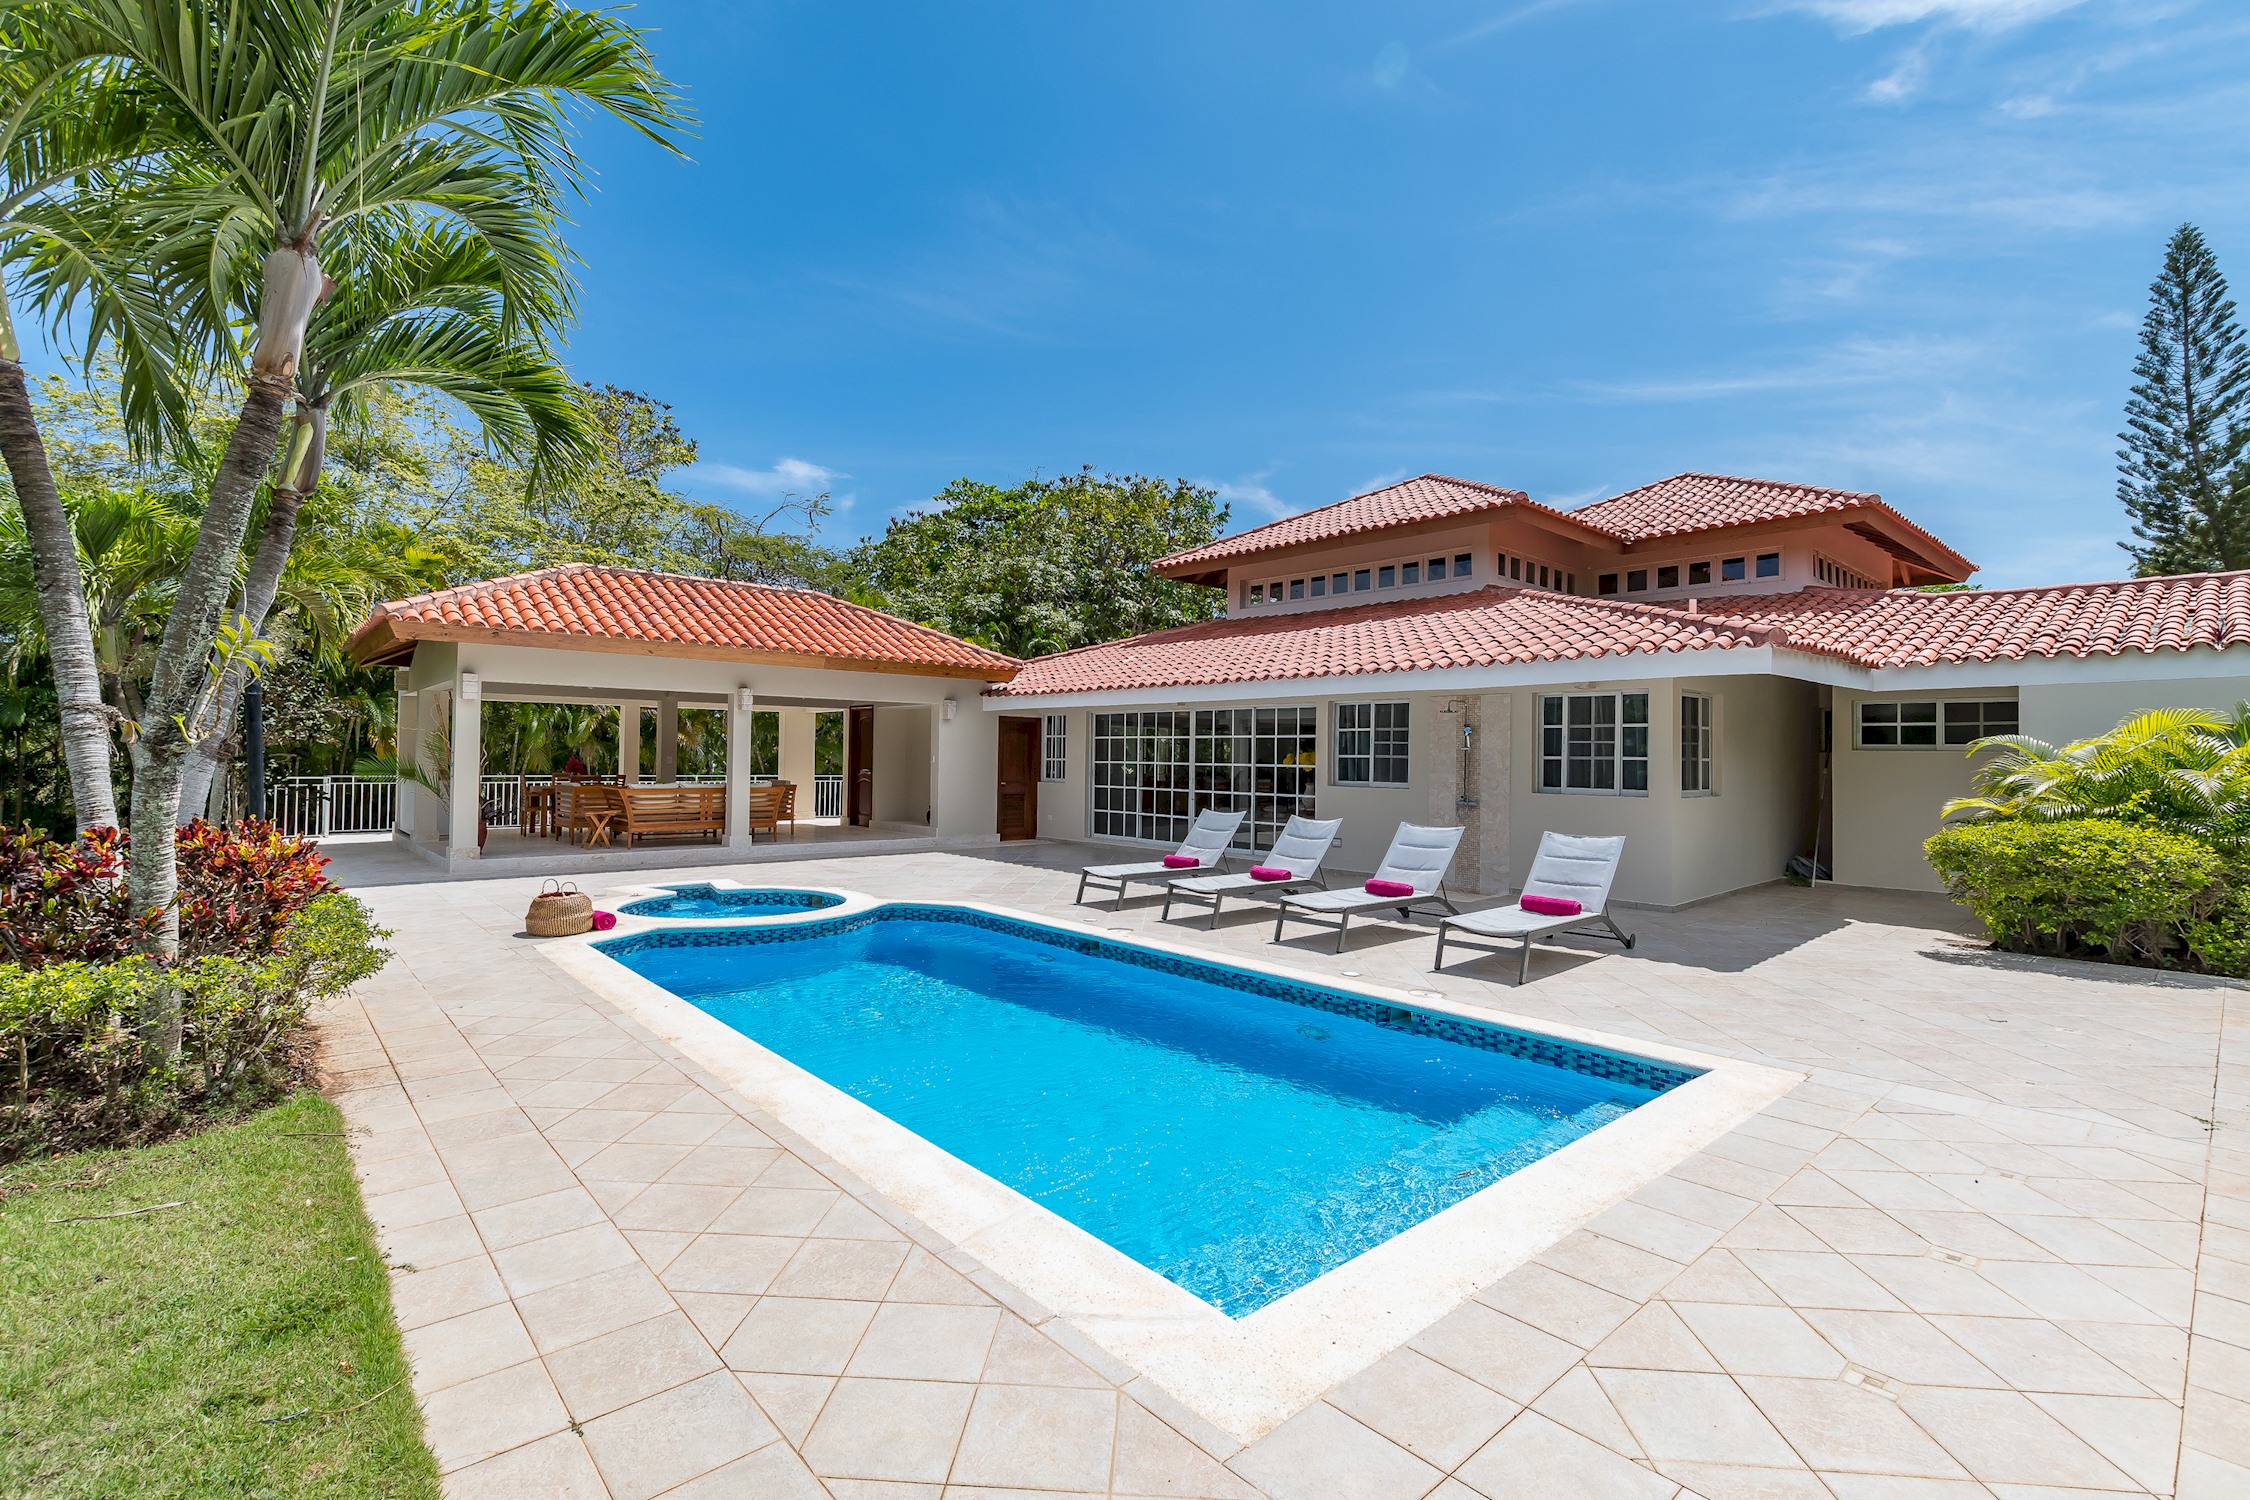 Casa de Campo villa for rent in Caribbean style - pool, jacuzzi, volleyball net 0